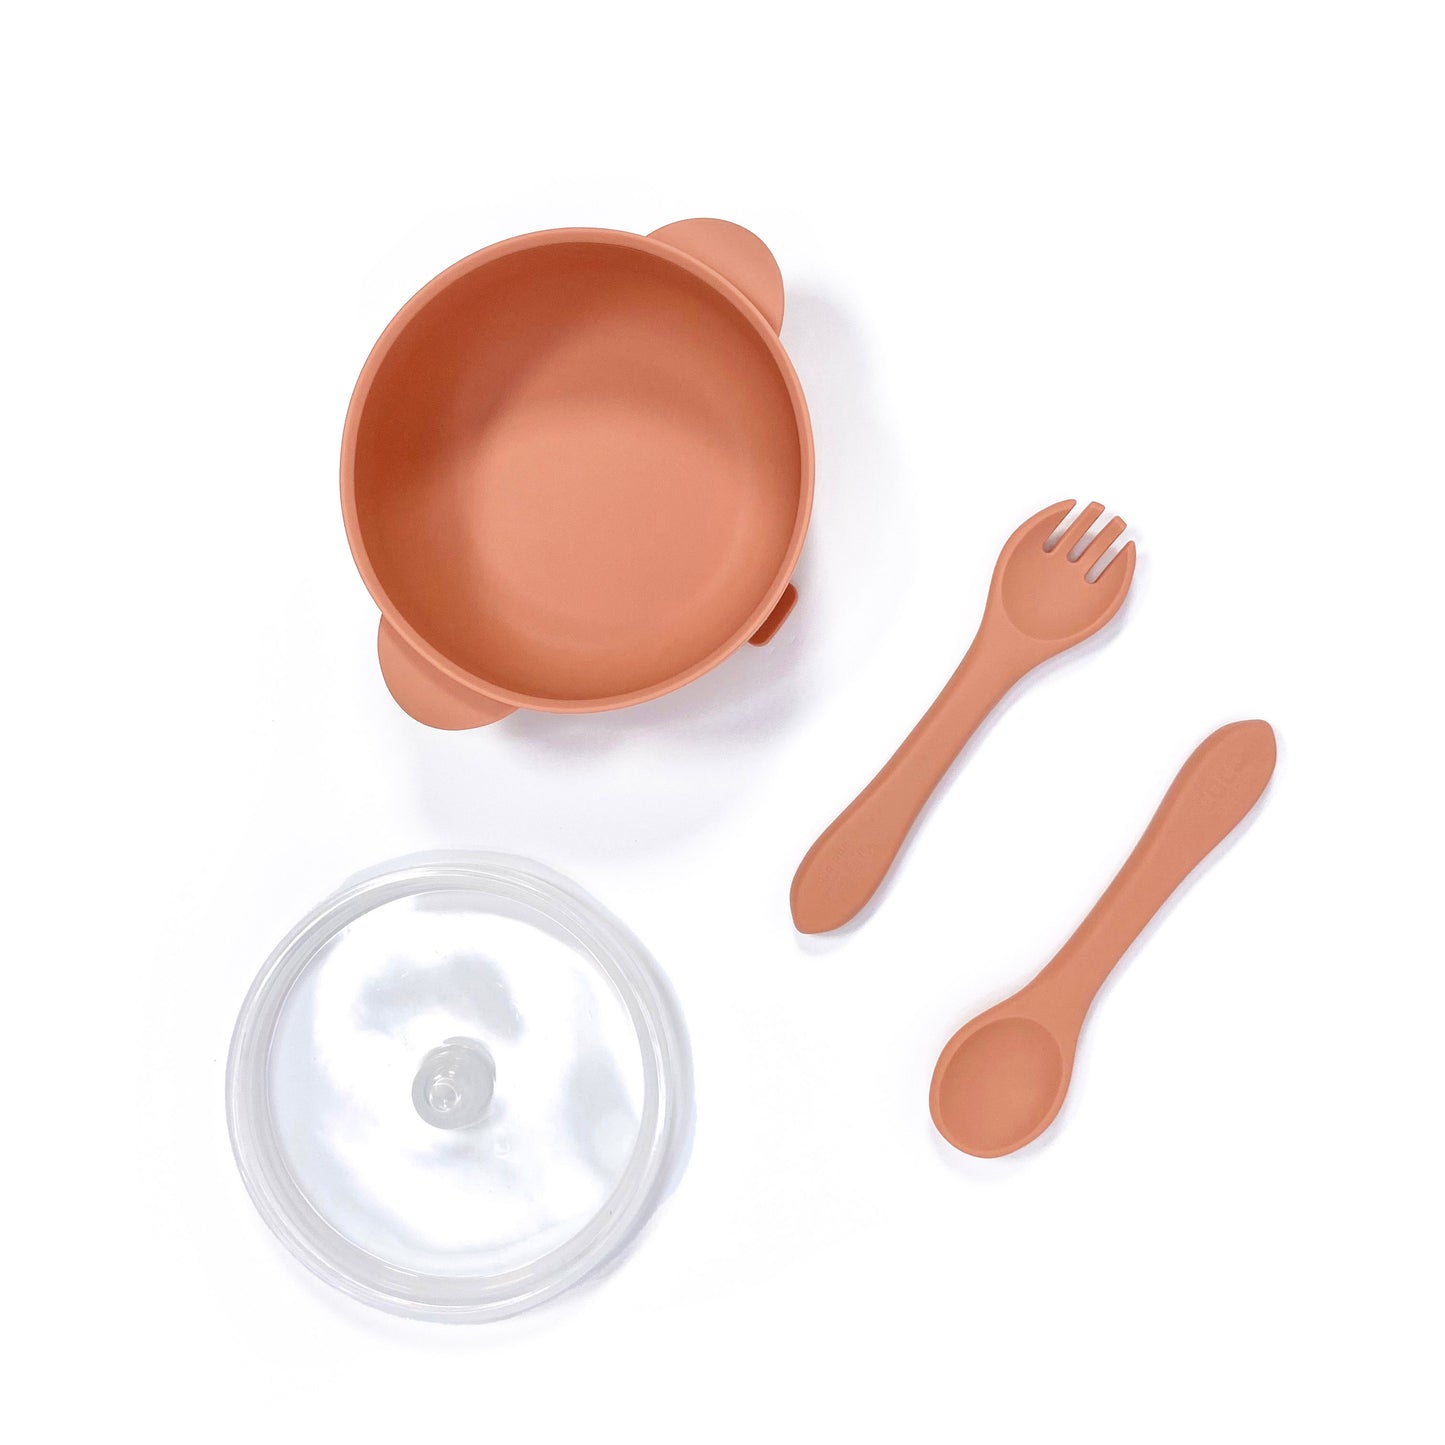 A sunset orange silicone children’s feeding set, including silicone bowl with lid and matching silicone cutlery. Image shows the bowl, lid and cutlery separately, from above.